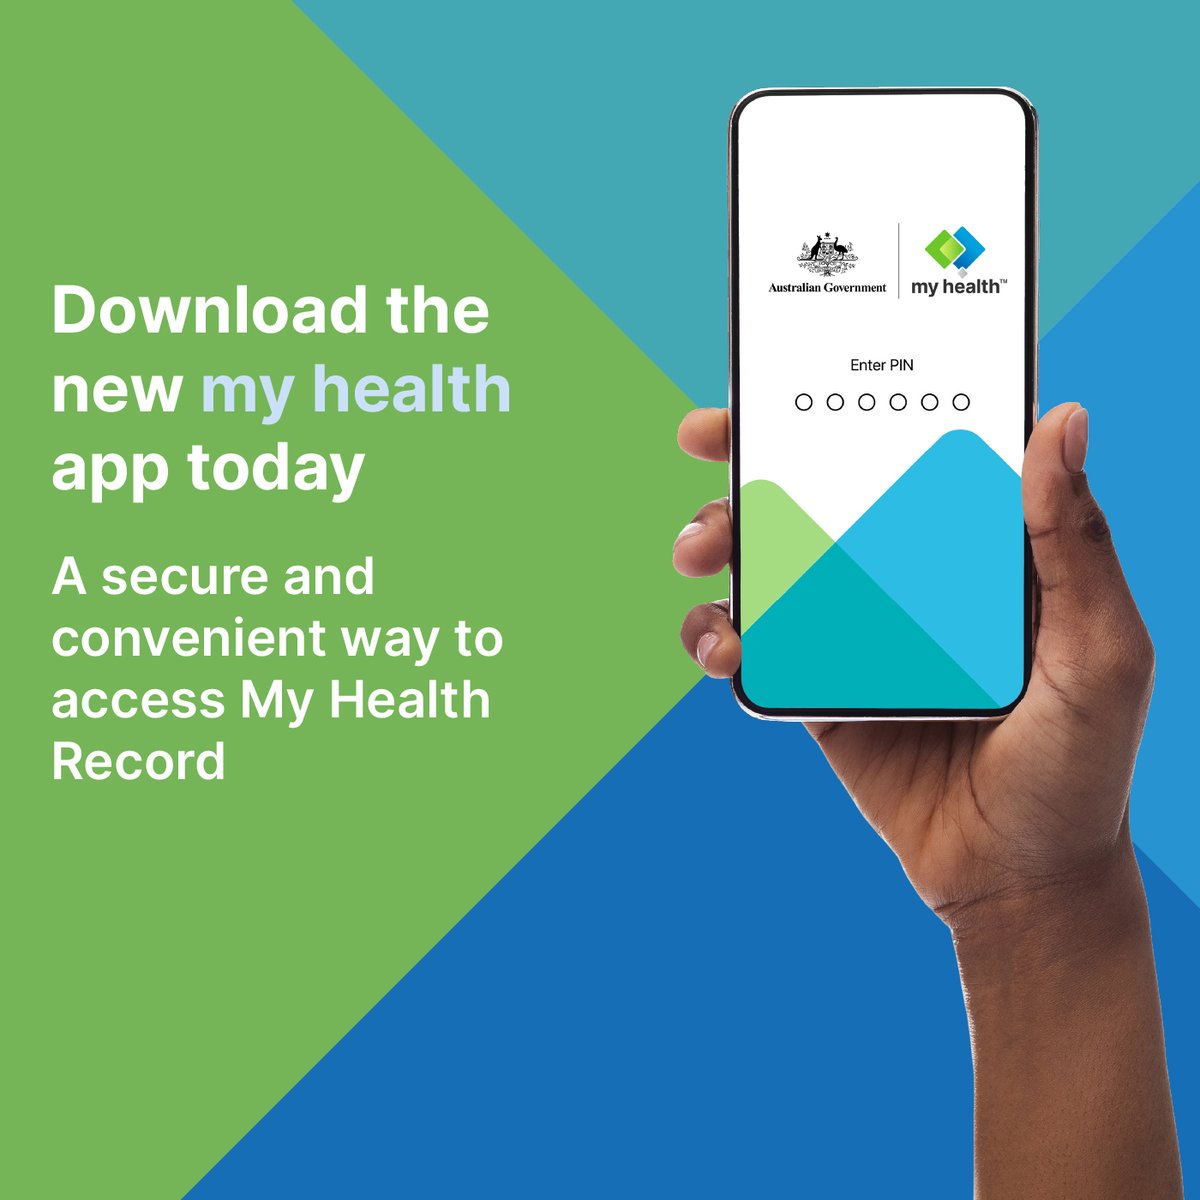 Download the new my health app today! It’s a secure and convenient way to access #MyHealthRecord on your mobile! To find out more and download the app, go to digitalhealth.gov.au/myhealth #digitalhealth #myhealth @AuDigitalHealth